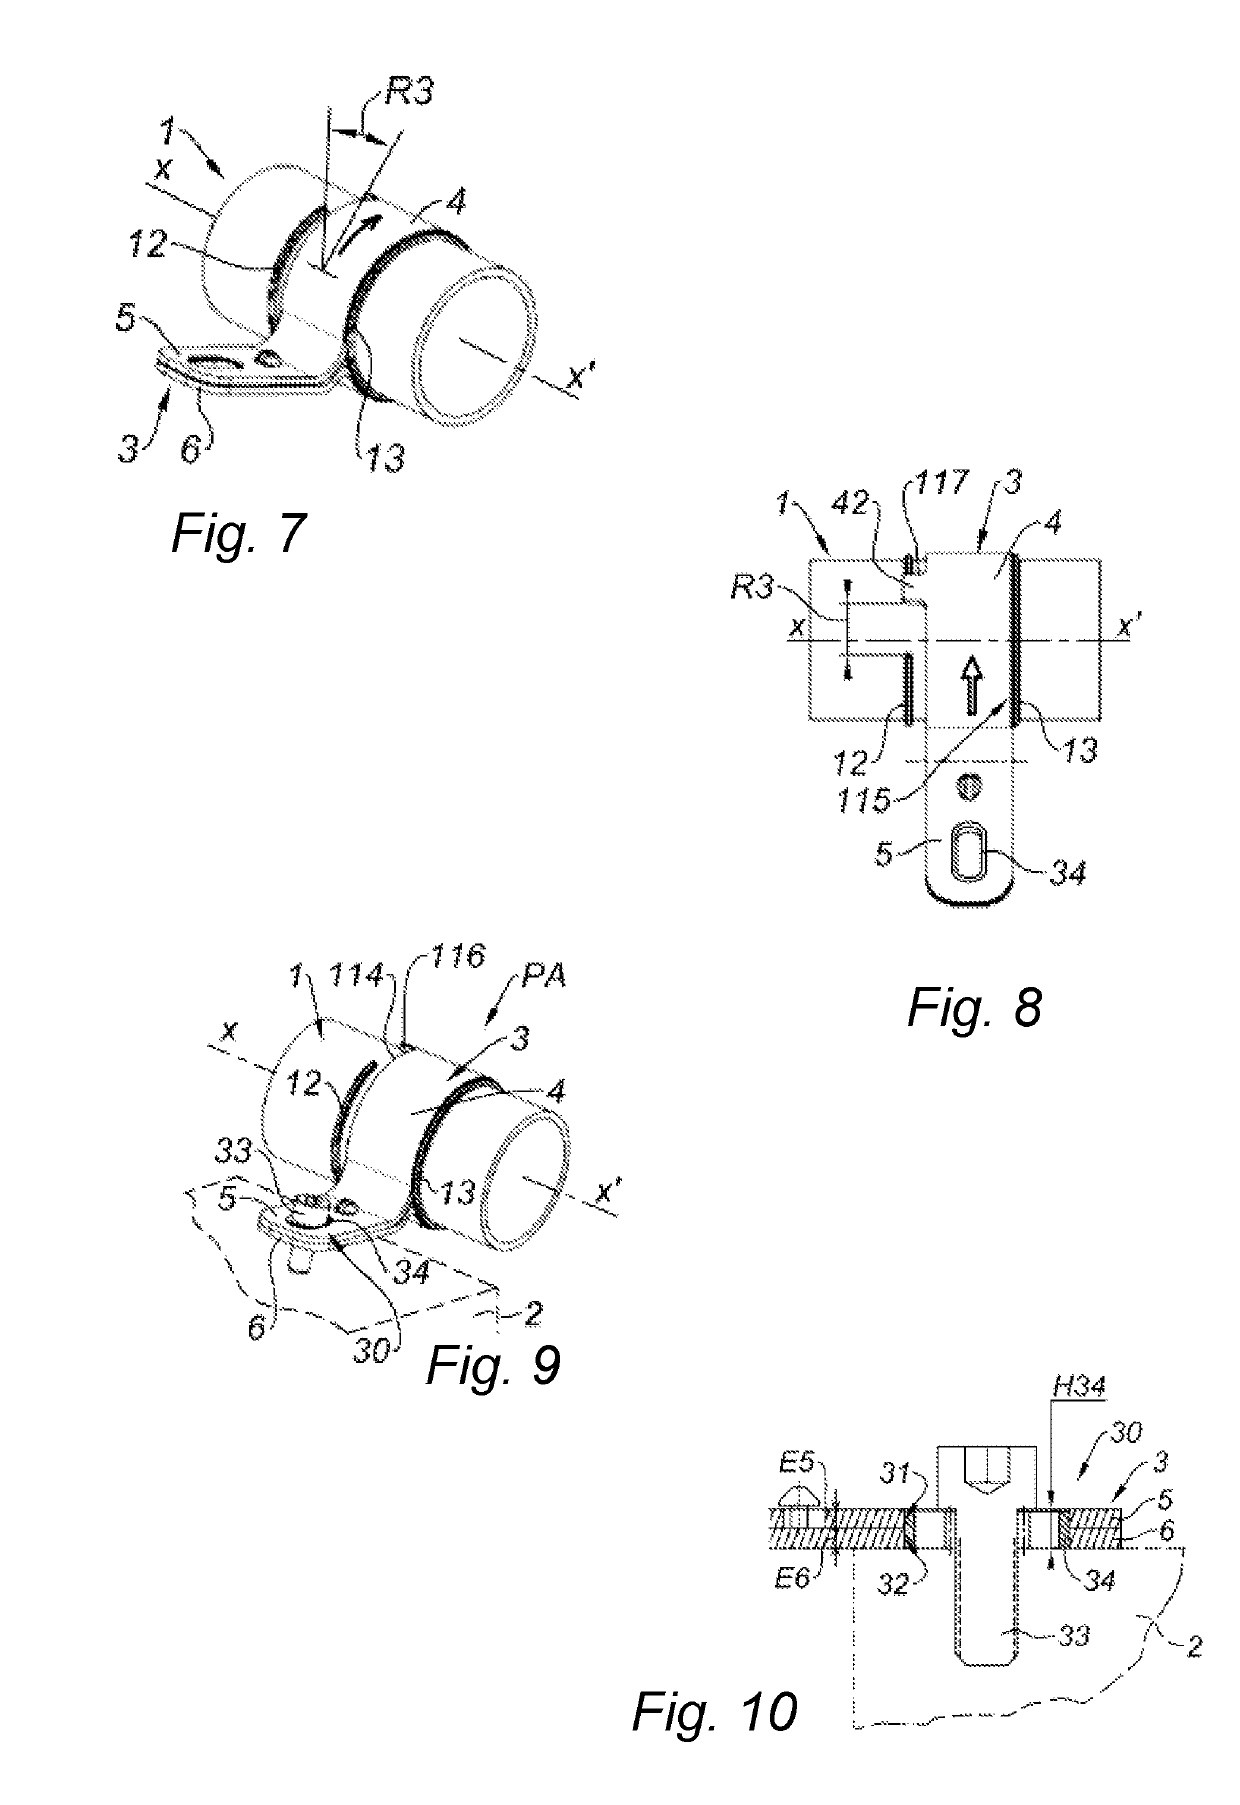 Method for fastening a conduit on a support by means of freely adjustable captive flanges